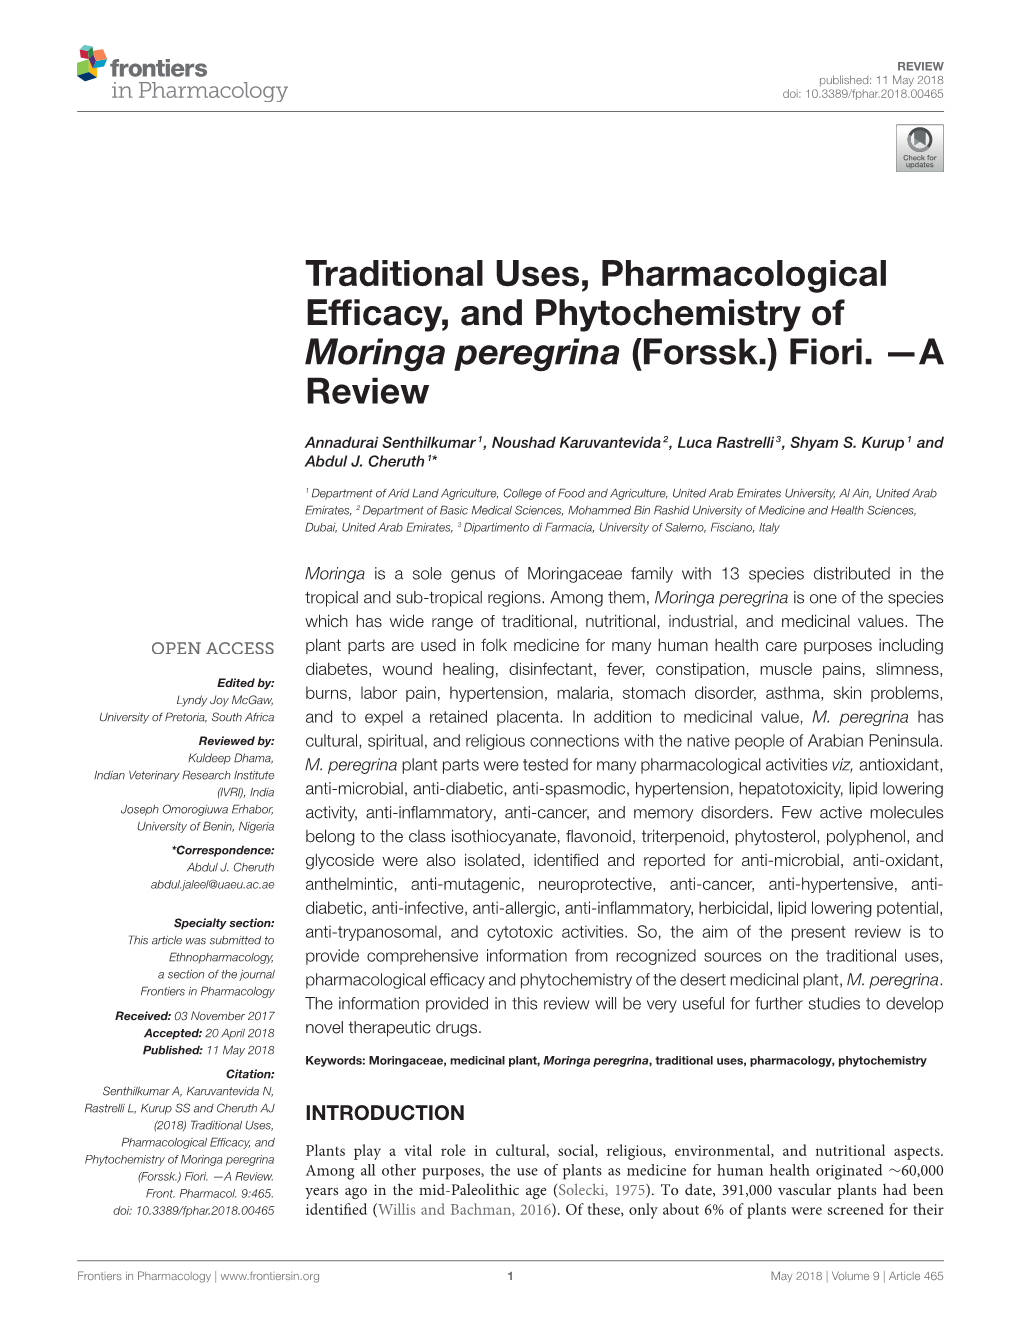 Traditional Uses, Pharmacological Efficacy, and Phytochemistry Of